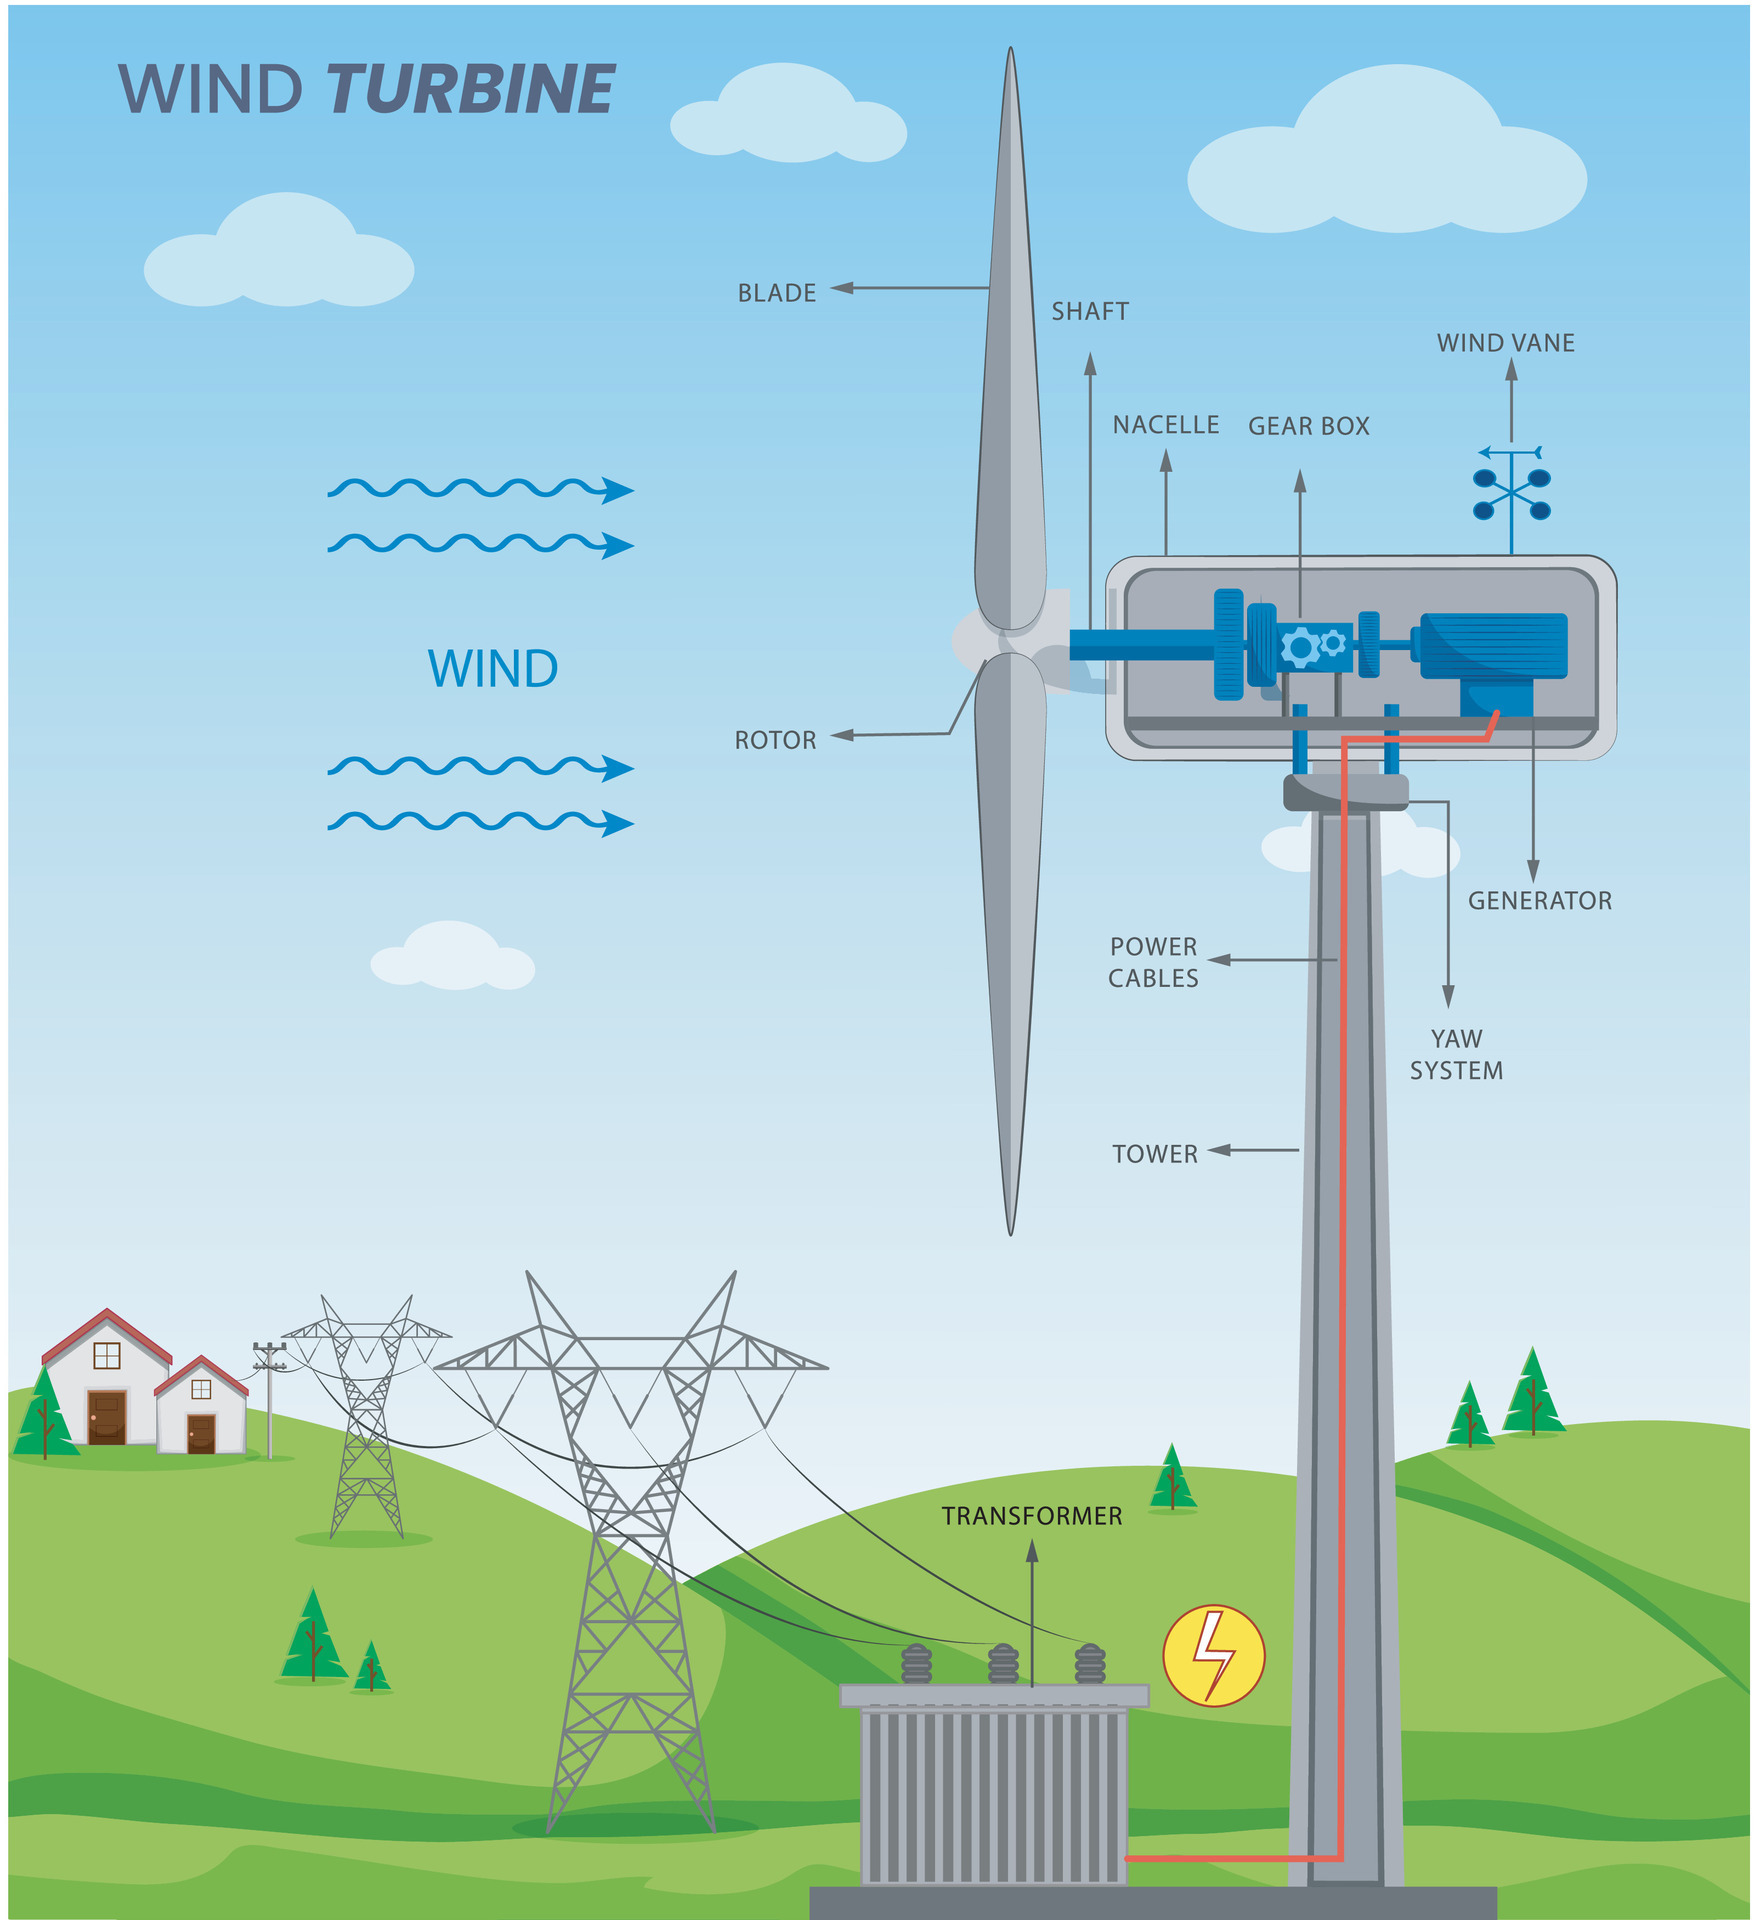 https://static.vecteezy.com/system/resources/previews/032/487/285/original/wind-turbine-was-converts-wind-energy-to-electricity-spinning-blades-power-a-generator-vector.jpg